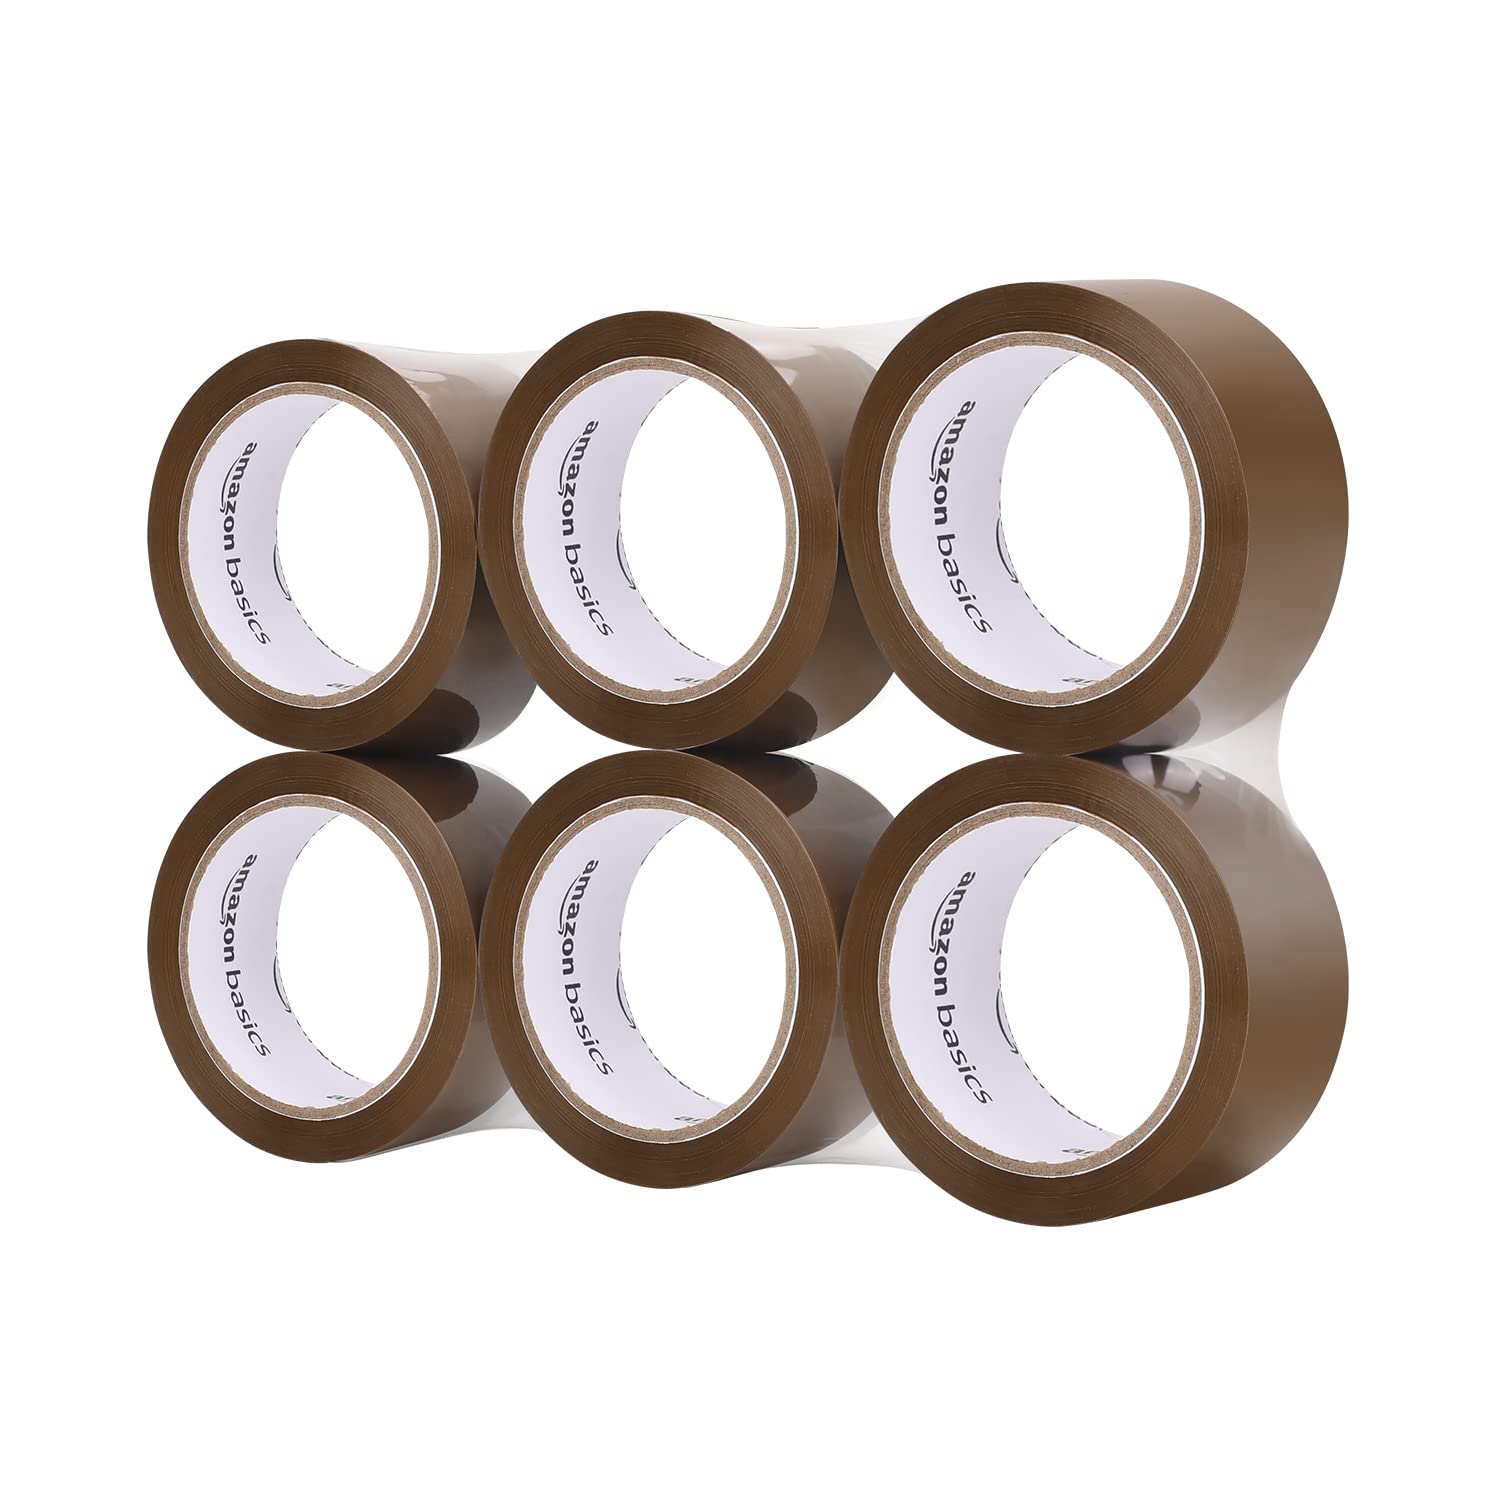 Amazon Basics Packaging Tape, 1.9 in x 72.2 yards, [...]